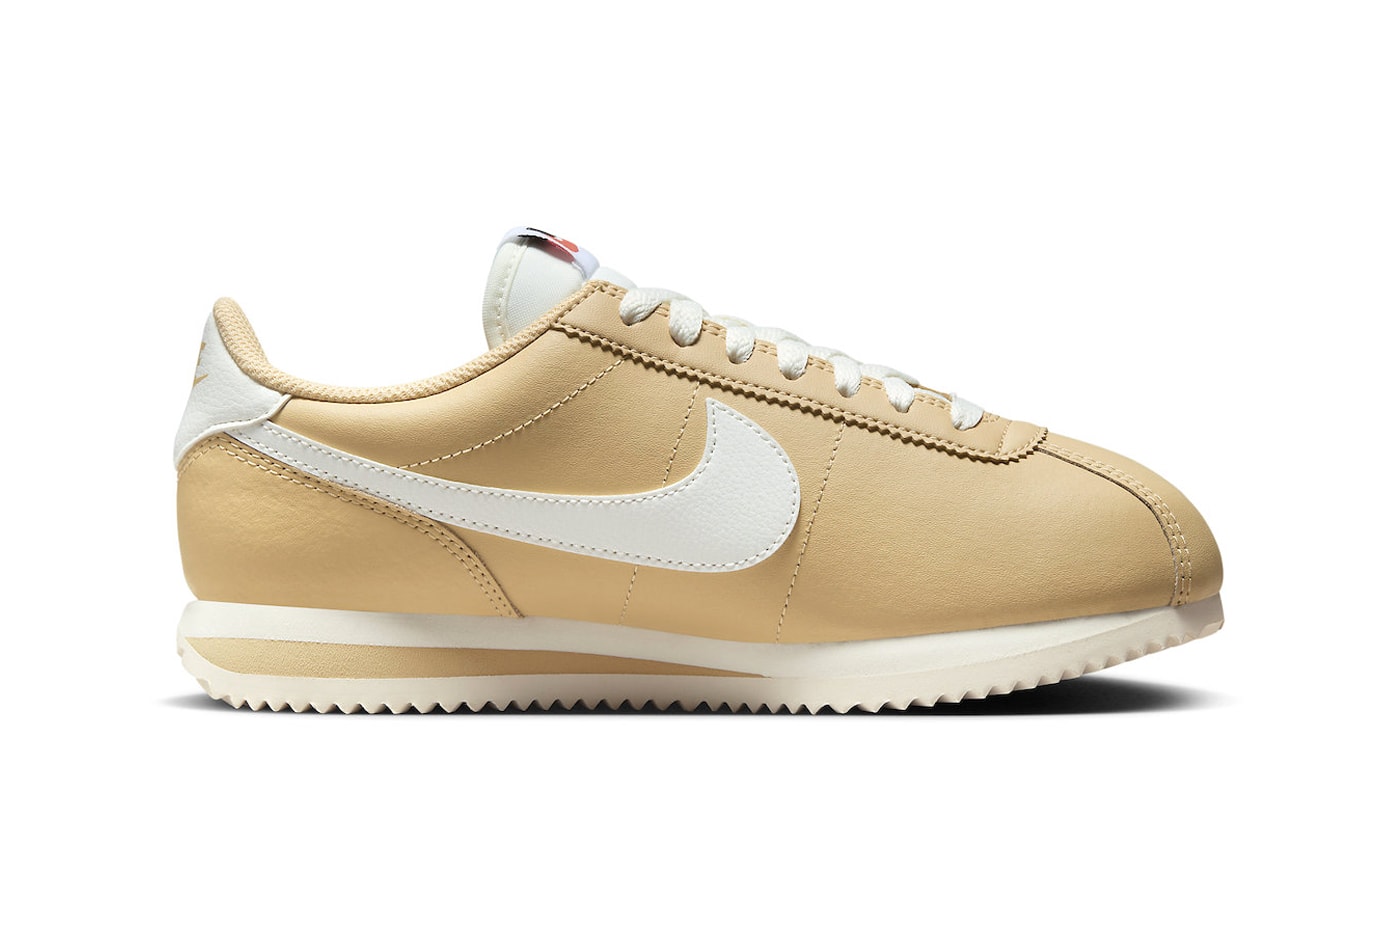 Official Look at the Nike Cortez "Sesame" swoosh nike vintage summer shoe sail white DN1791-200